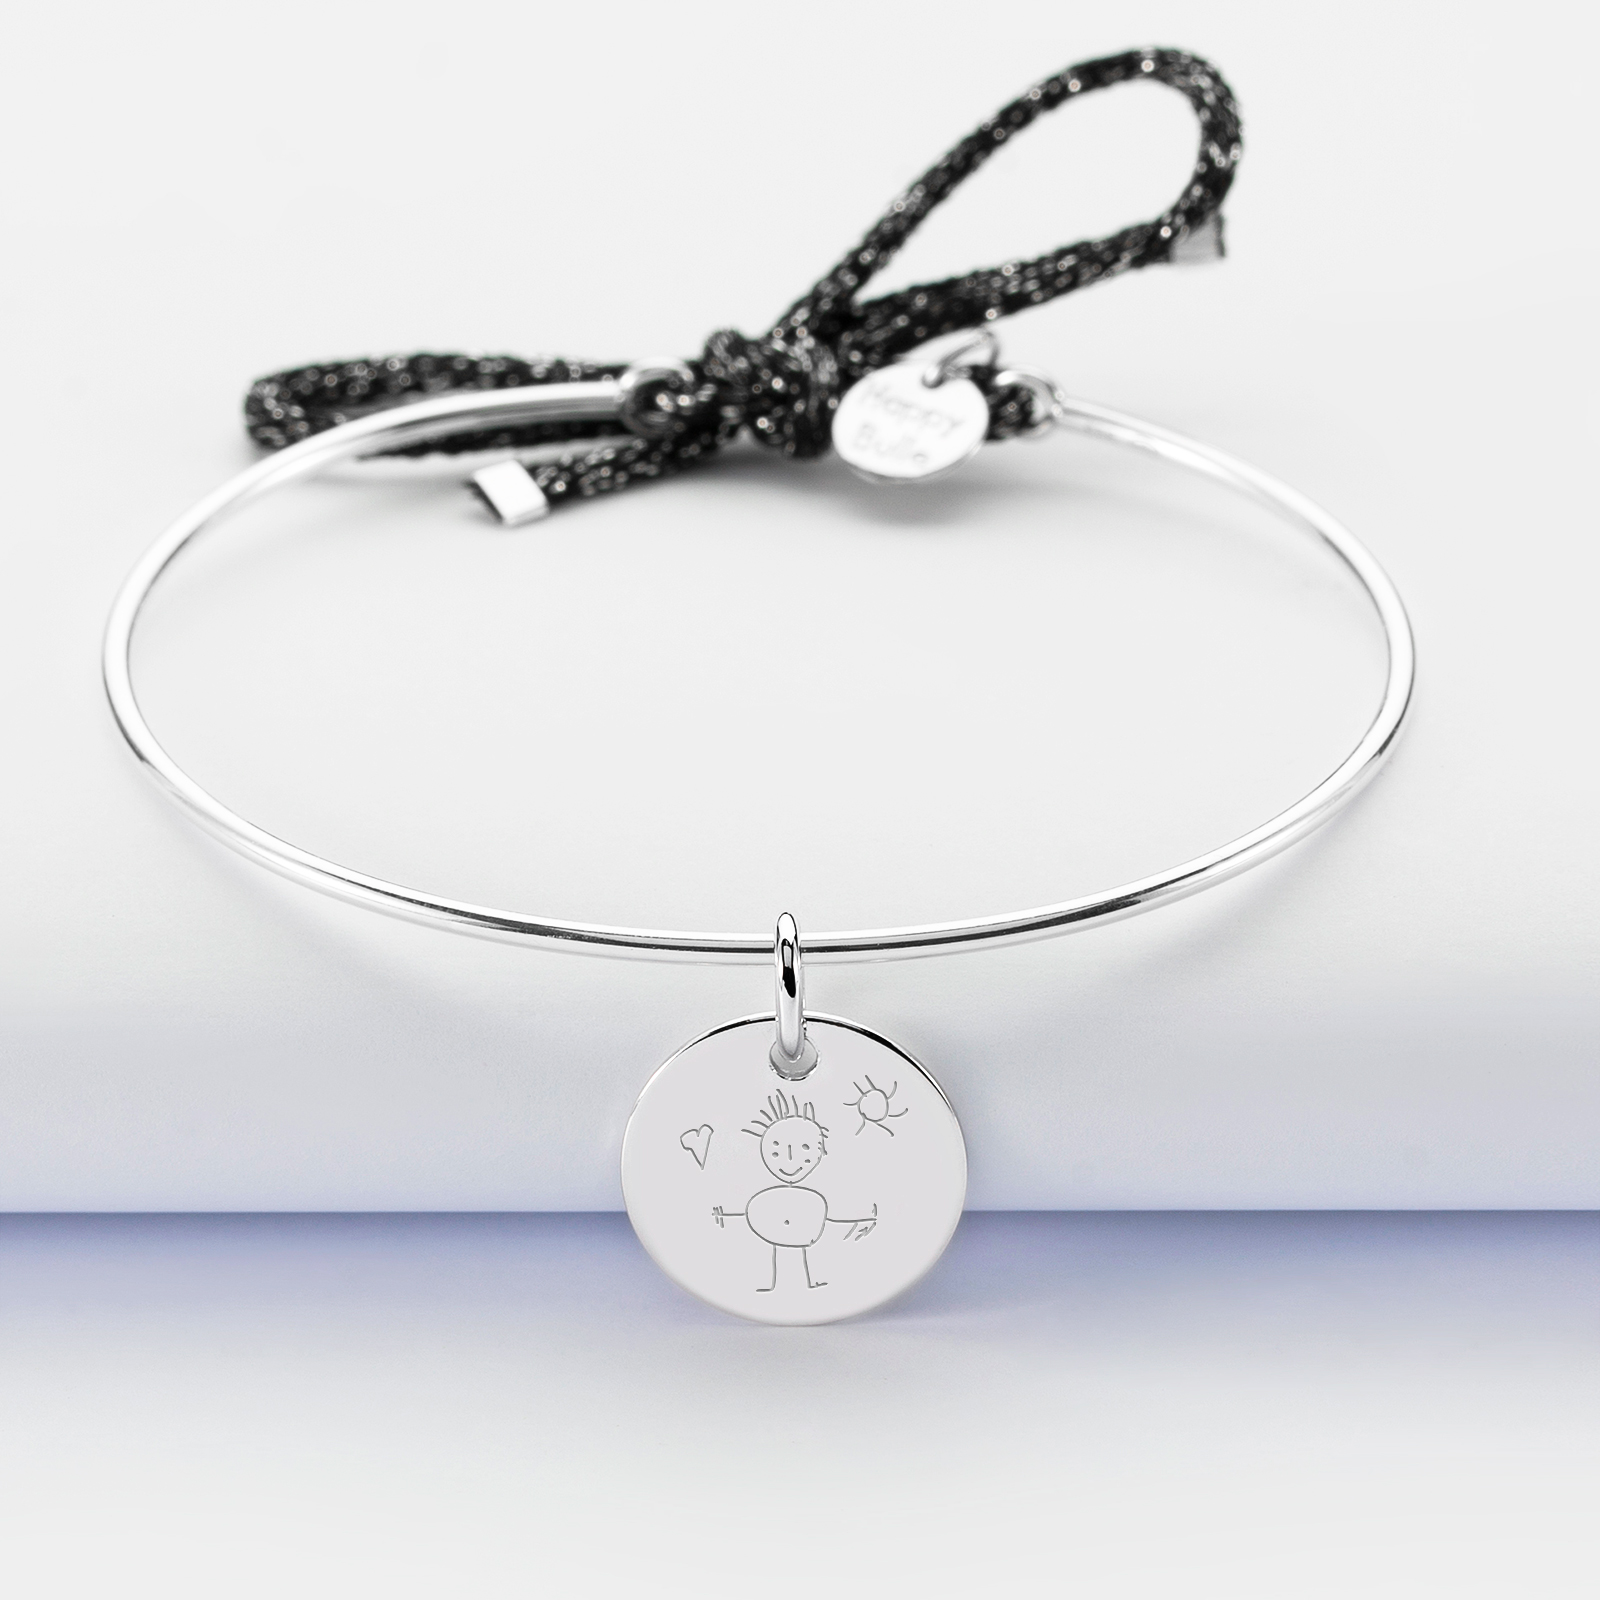 Personalised silver and sparkly cord bangle bracelet and 15mm engraved medallion - sketch